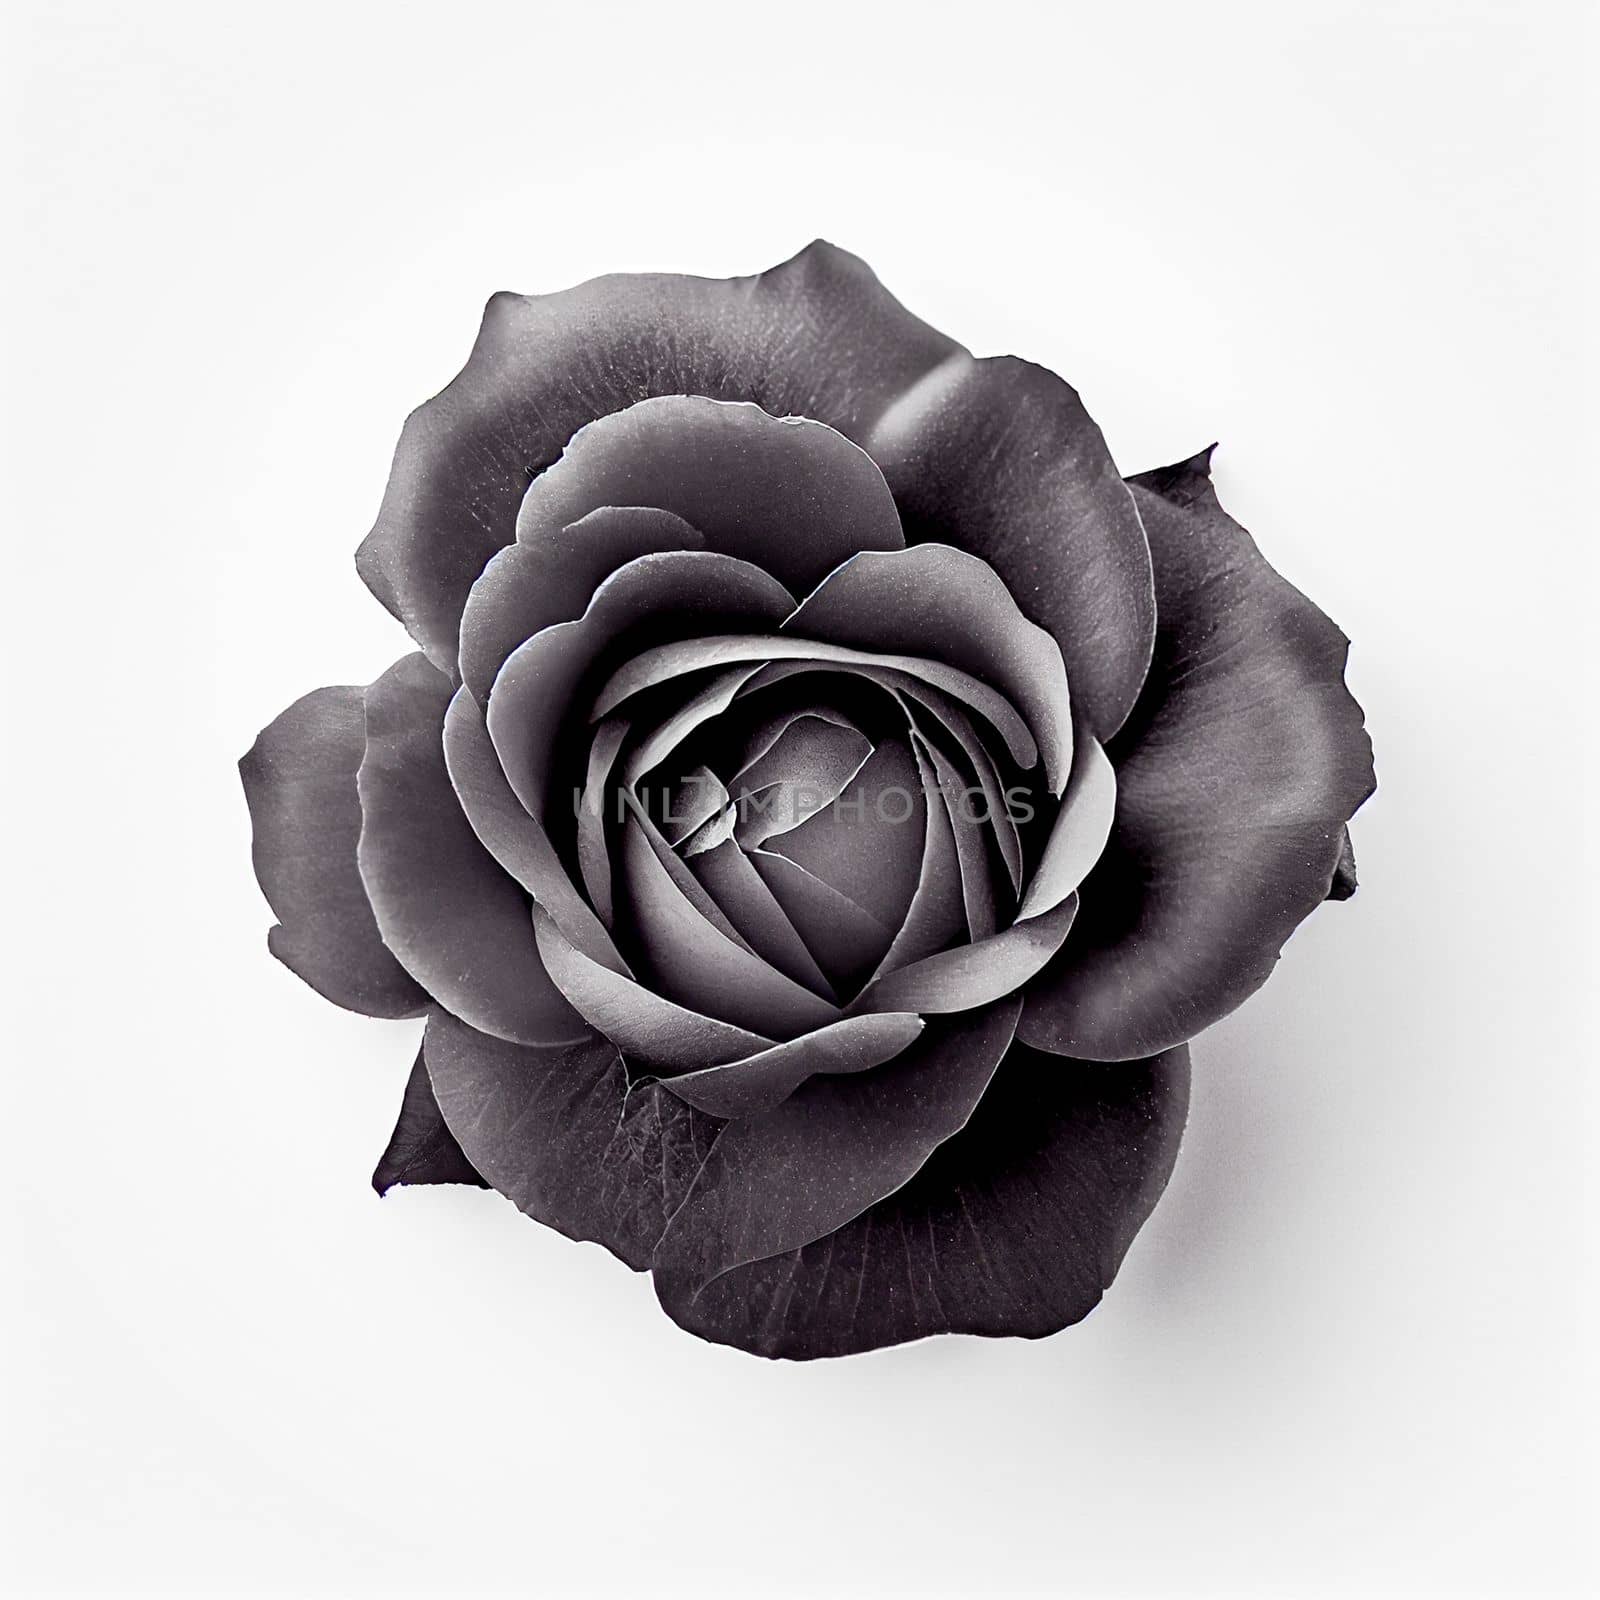 Top view of Black Rose flower on a white background, perfect for representing the theme of Valentine's Day.